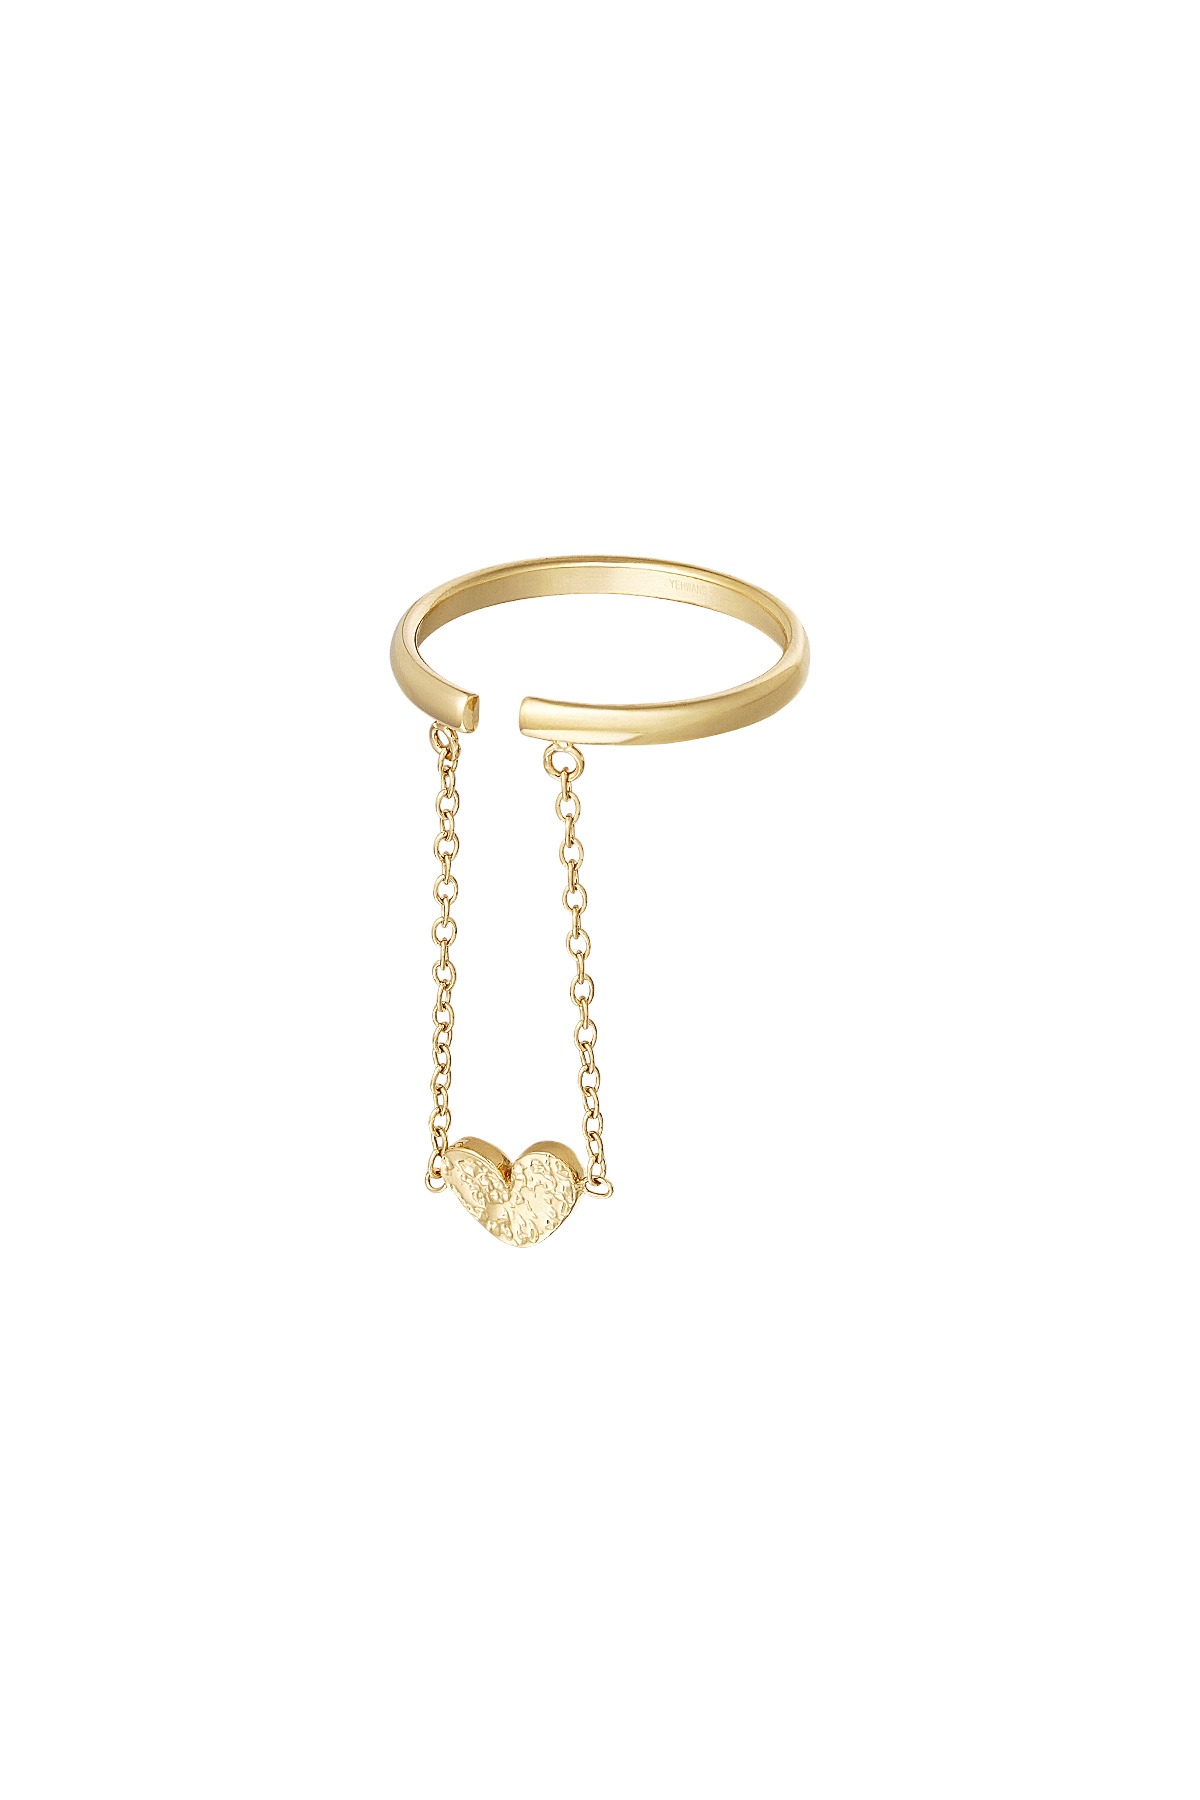 Ring heart with chain - gold h5 